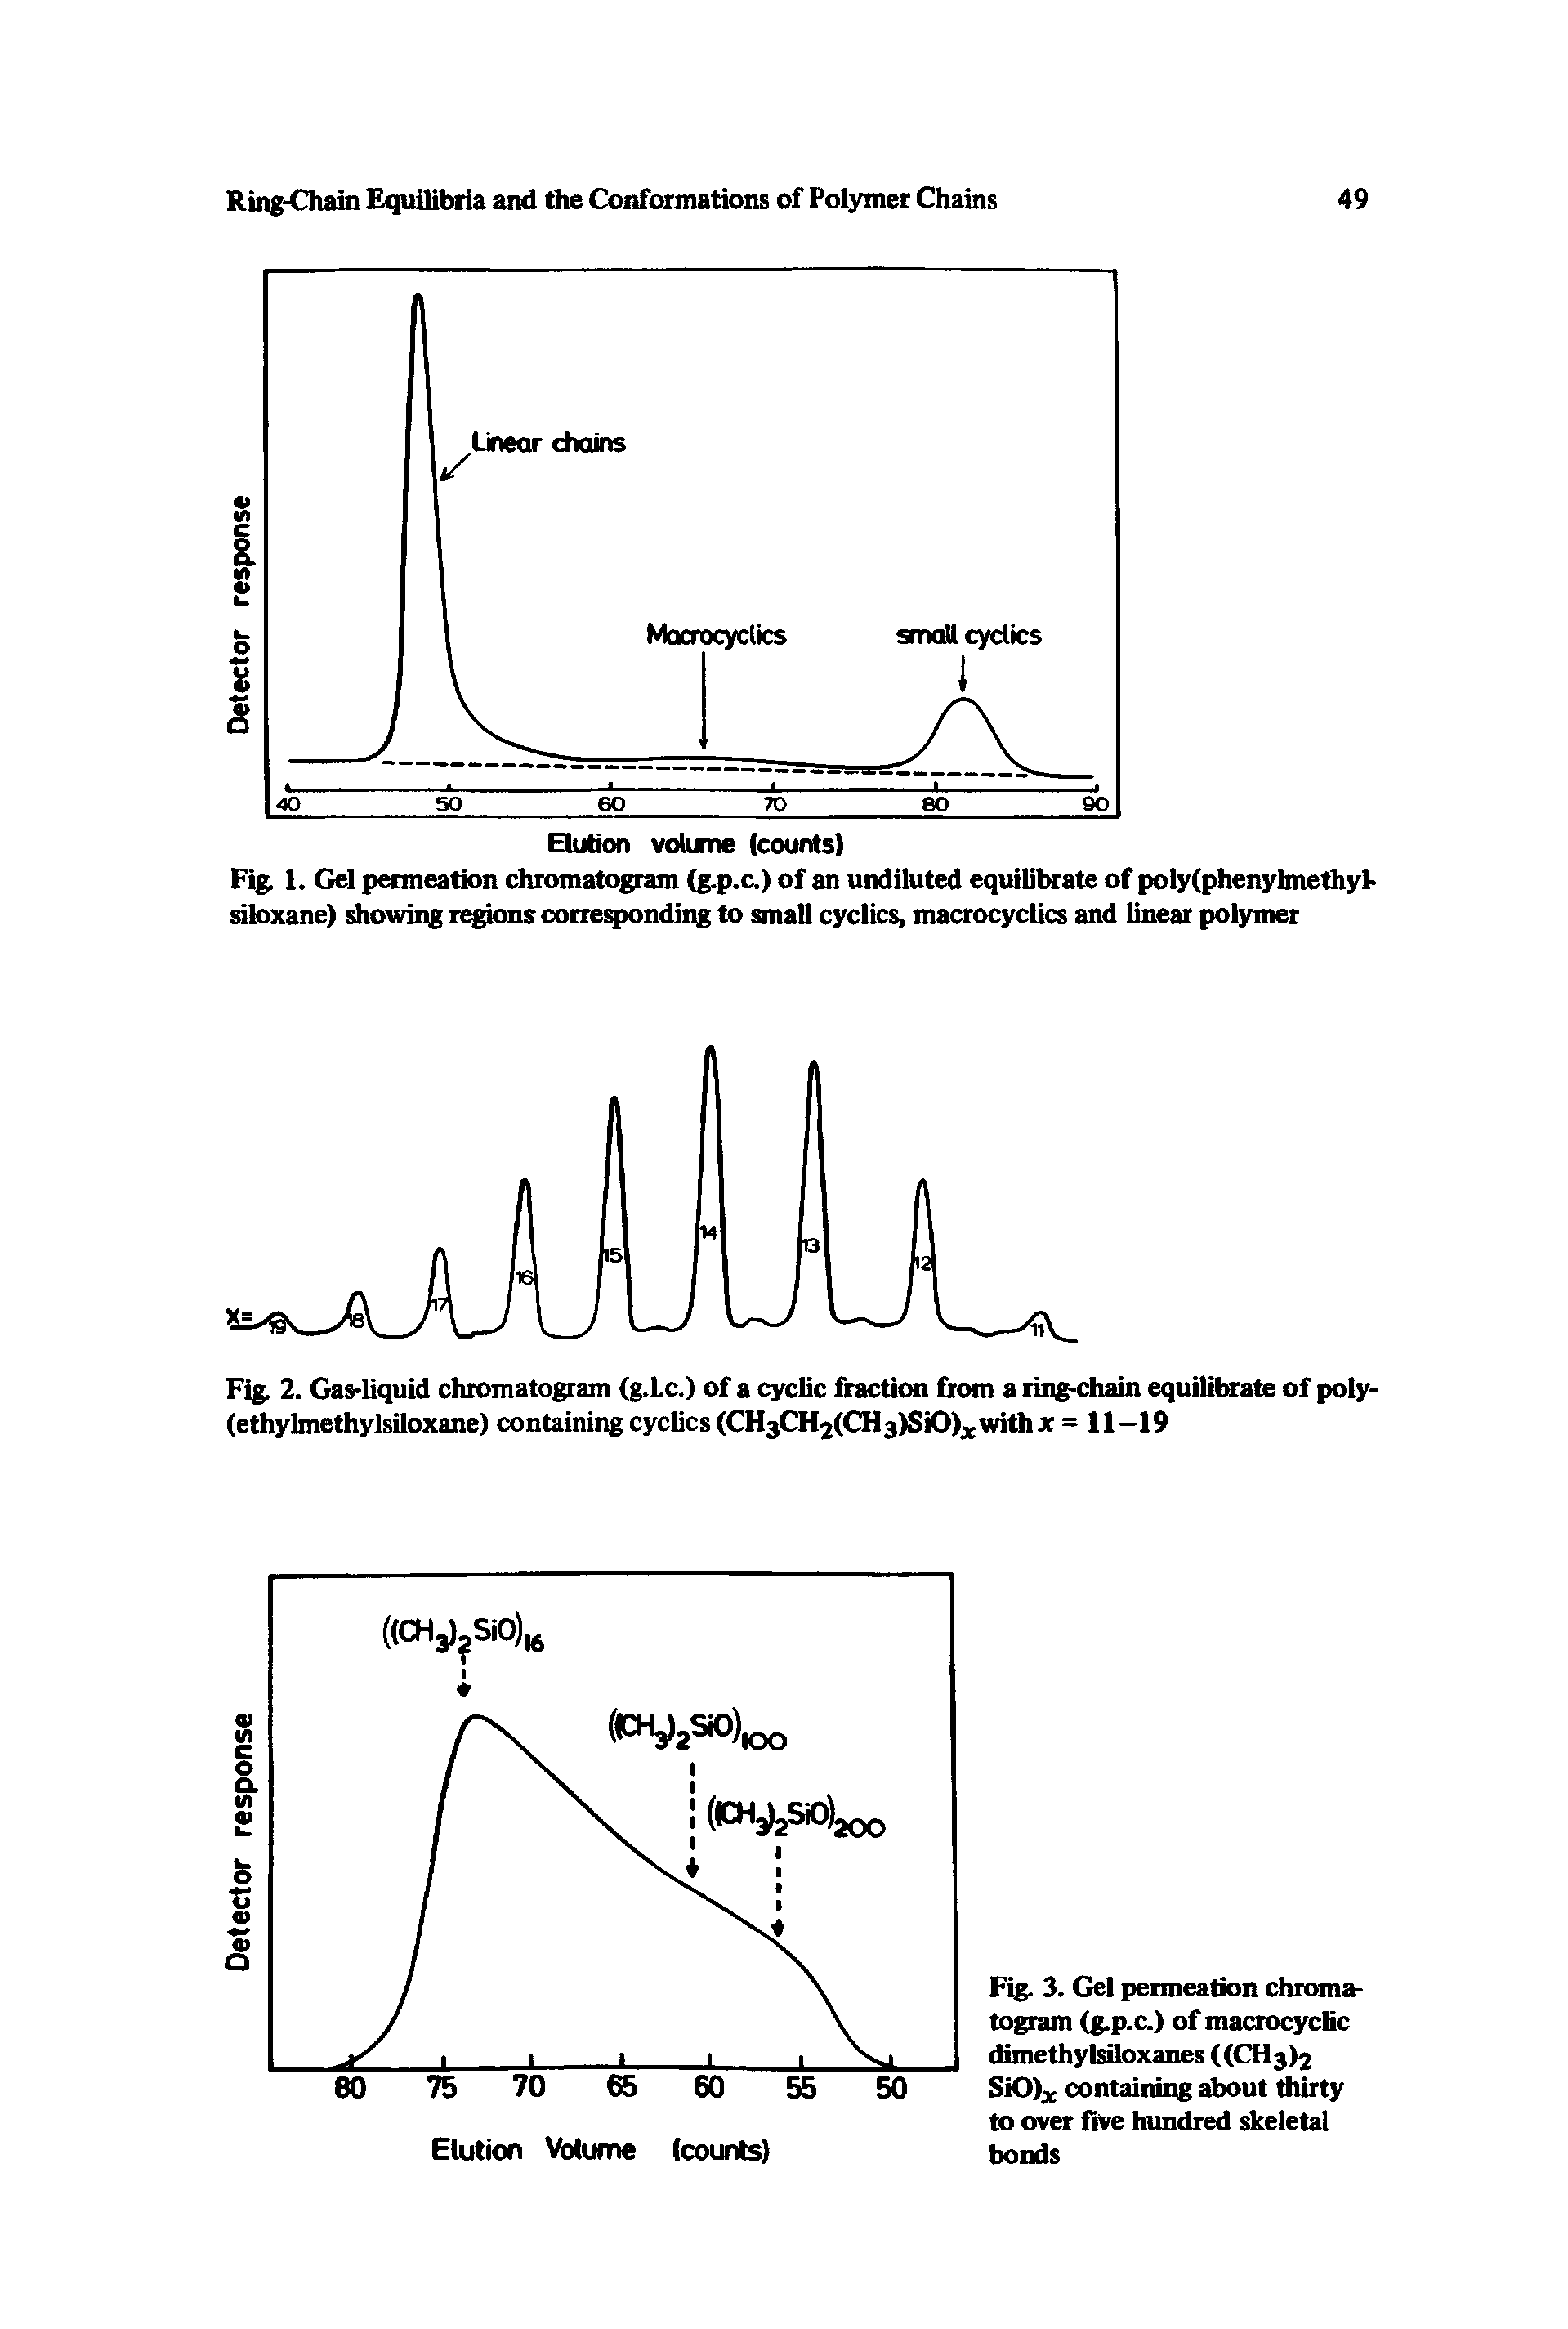 Fig. 2. Gas-liquid chromatogram (g.Lc.) of a cyclic fraction from a ring-chain equilitoate of poly-(ethylmethylsiloxane) containing cyclics (CH3CH2(CH3)SiO) xWifhx = 11-19...